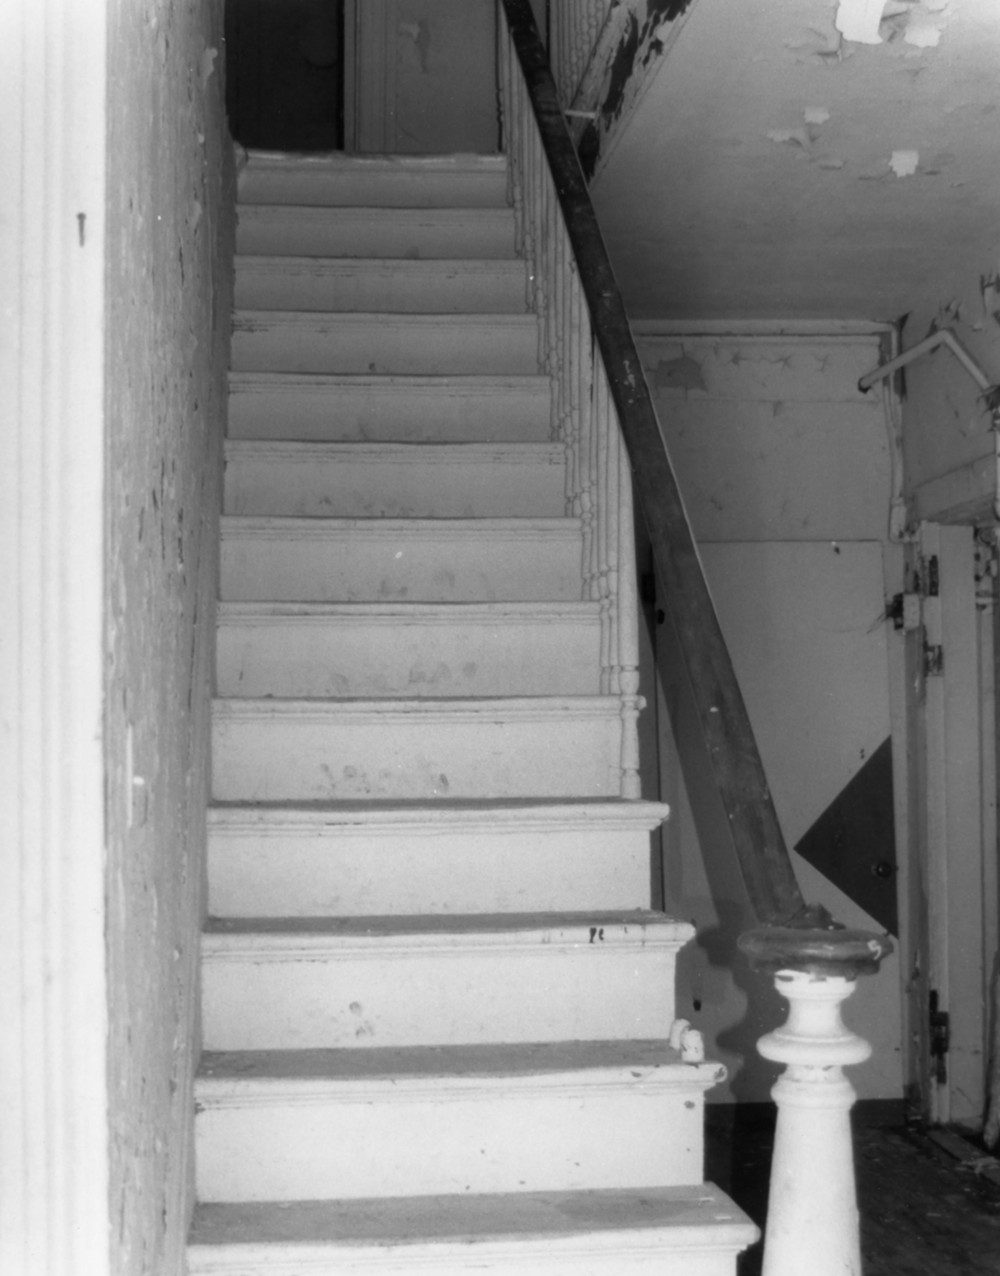 Execution Rocks Lighthouse, Port Washington New York Keepers' quarters, first floor stairway, looking northwest (2004)